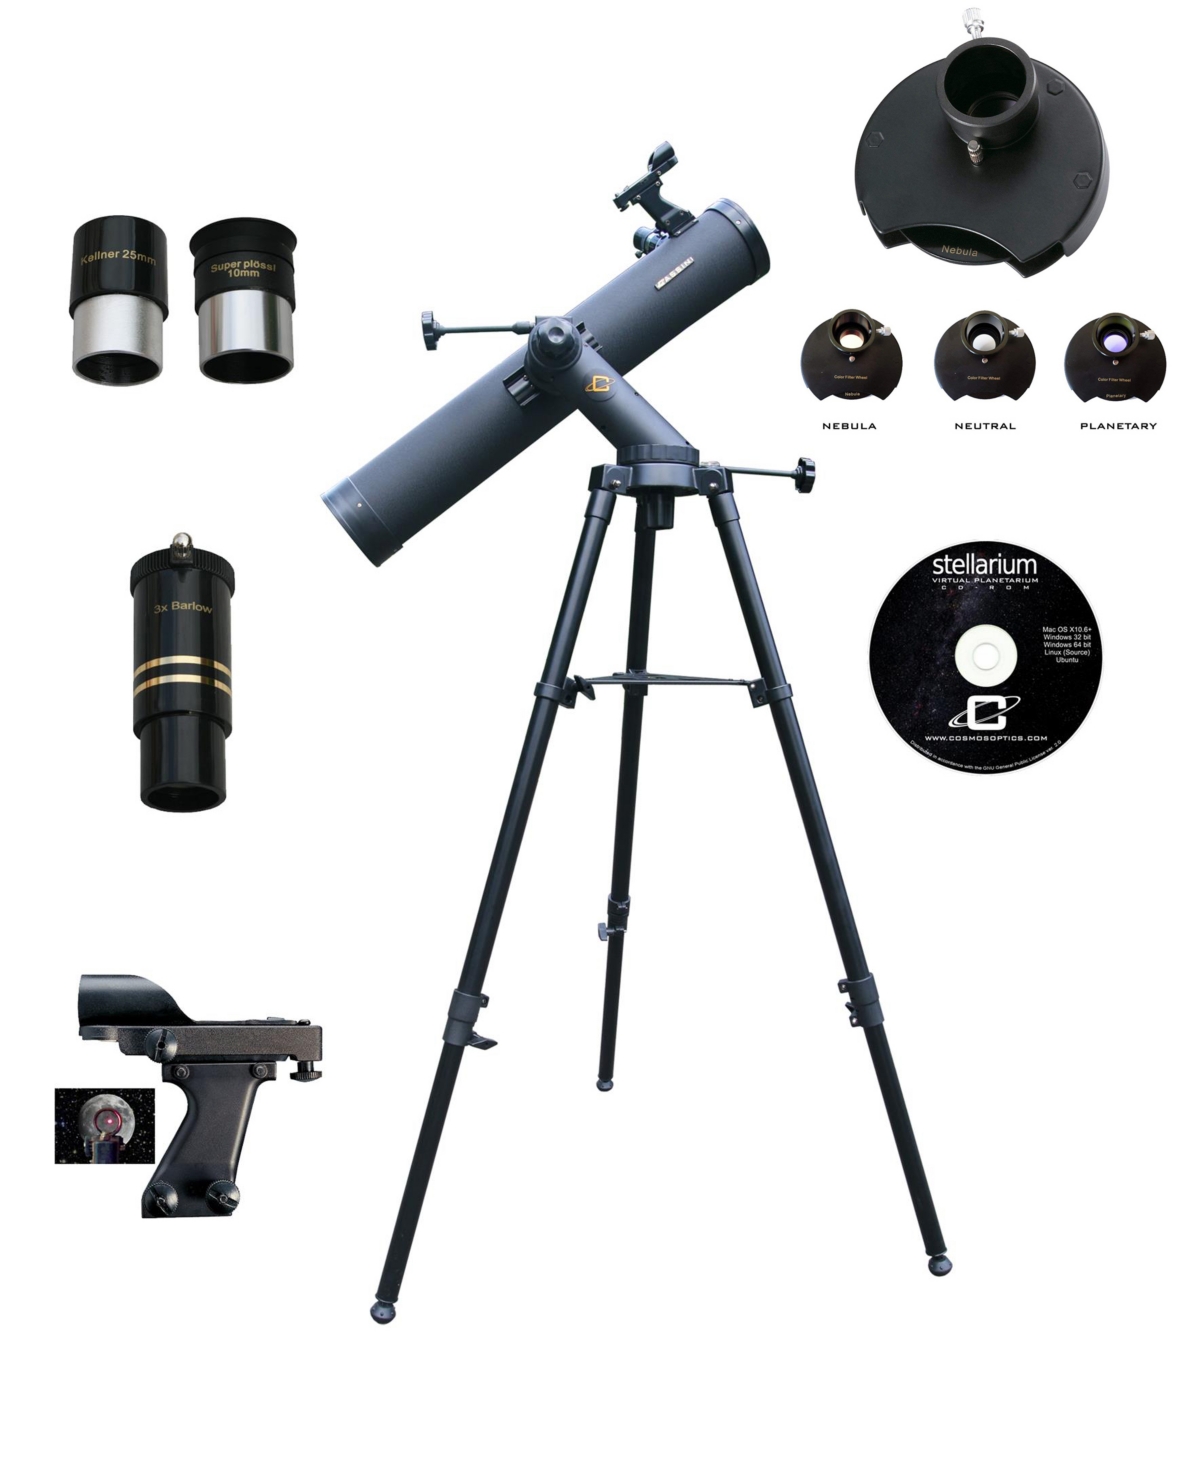 Cassini 1100mm X 102mm Astronomical Tracker Mount Telescope Kit With Color Filter Wheel In Black